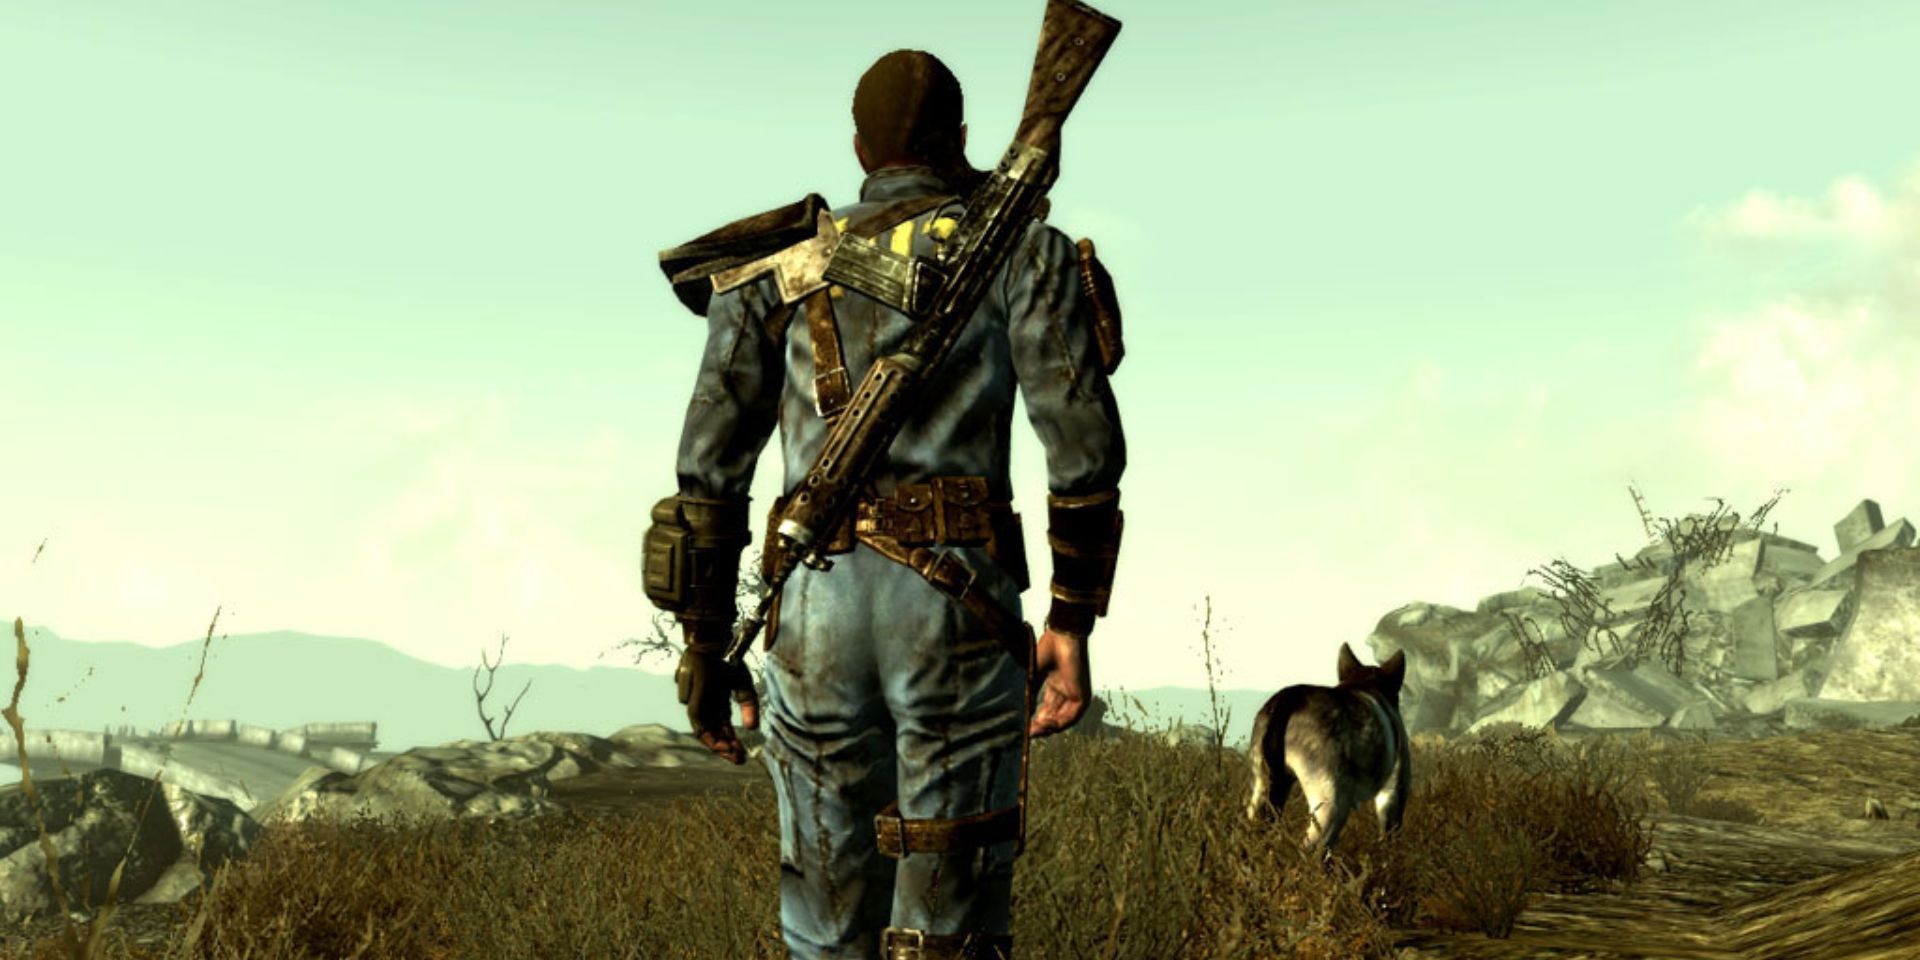 The Fallout 3 protagonist viewed from behind with his dog companion Dogmeat